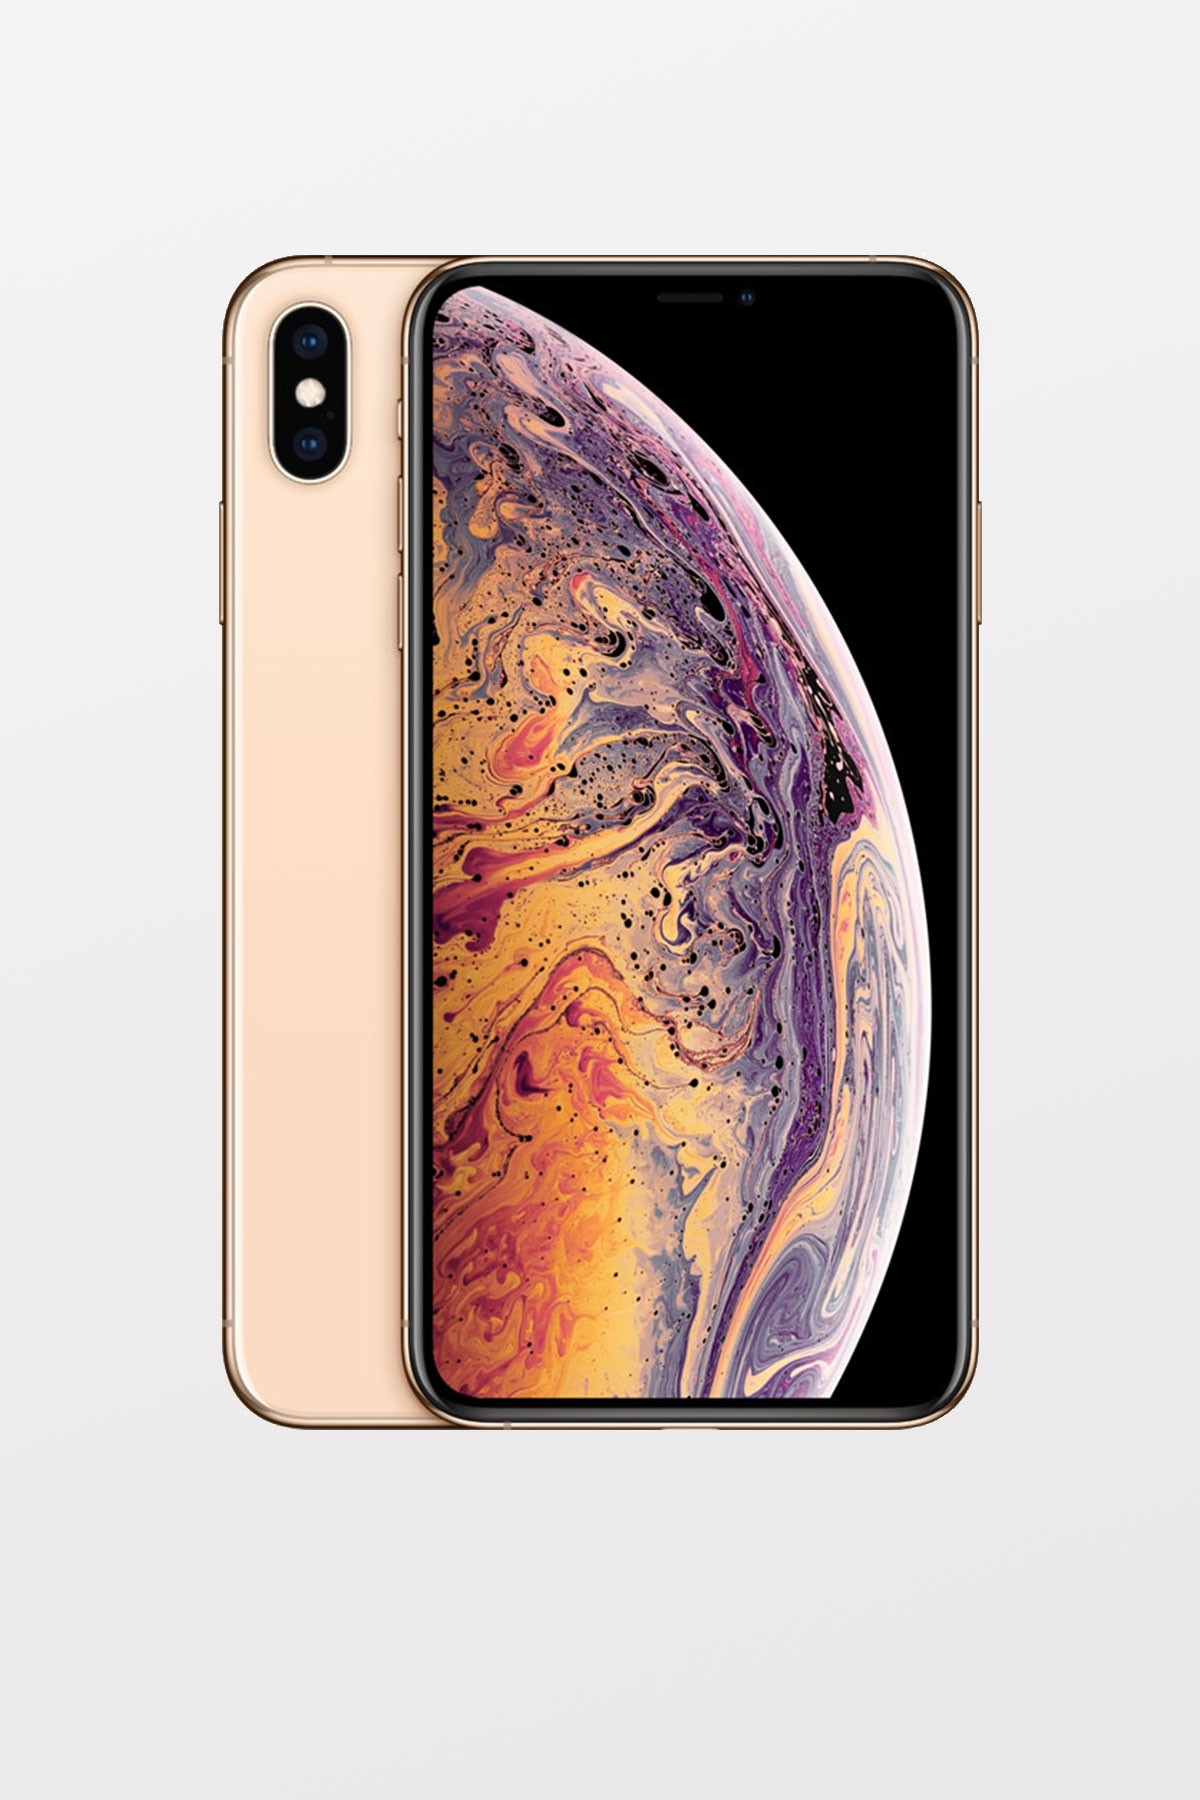 Apple iPhone Xs Max 64GB - Gold - Melbourne - Beyond the Box